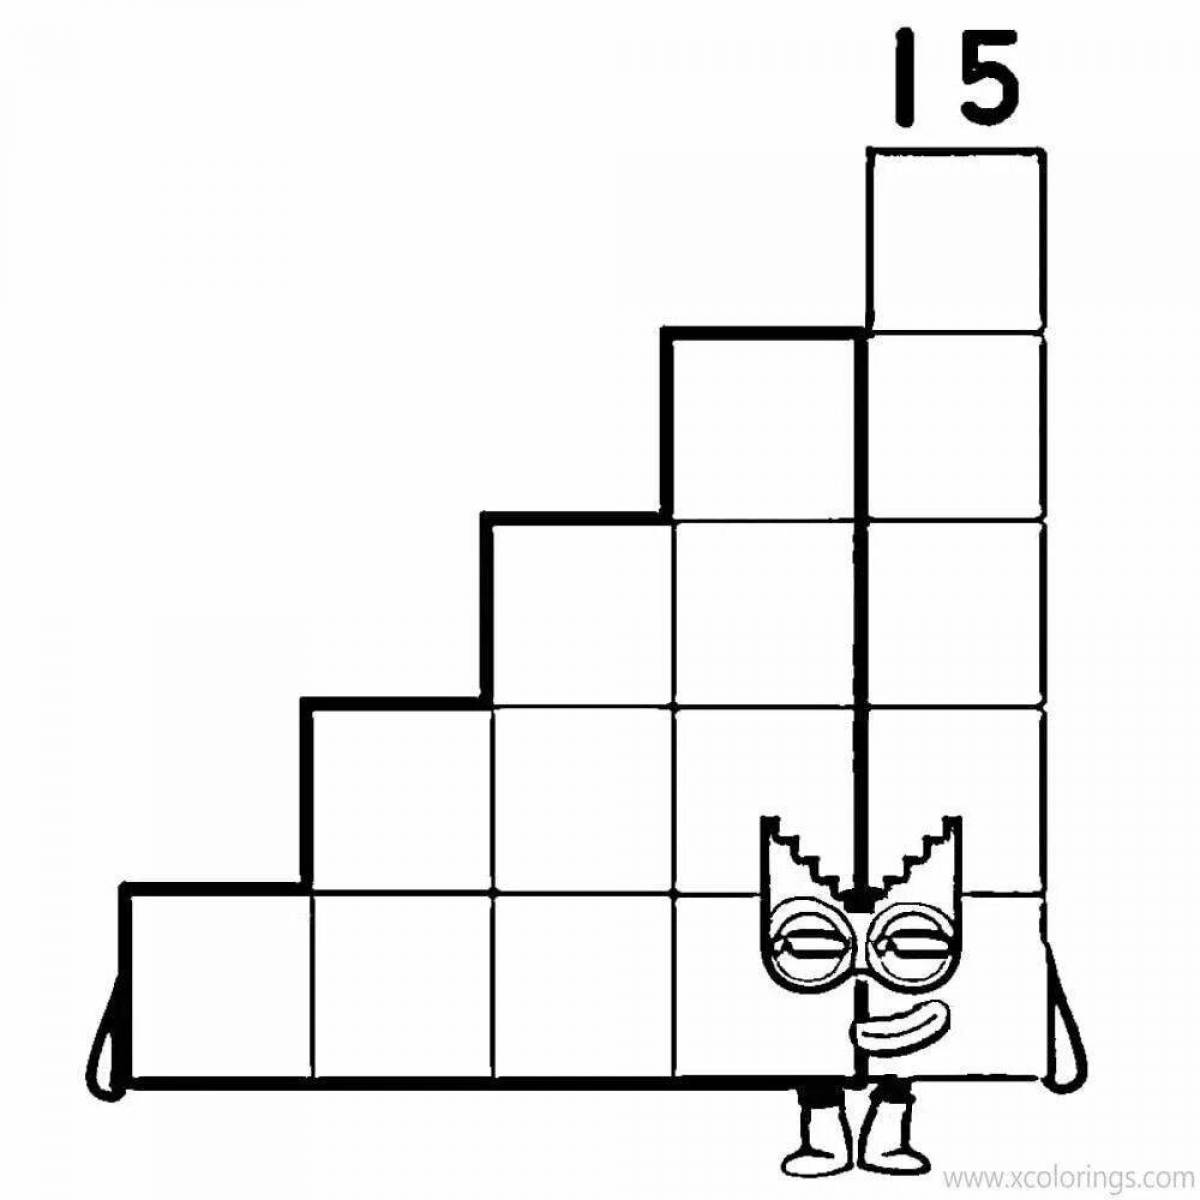 Exciting number block coloring page